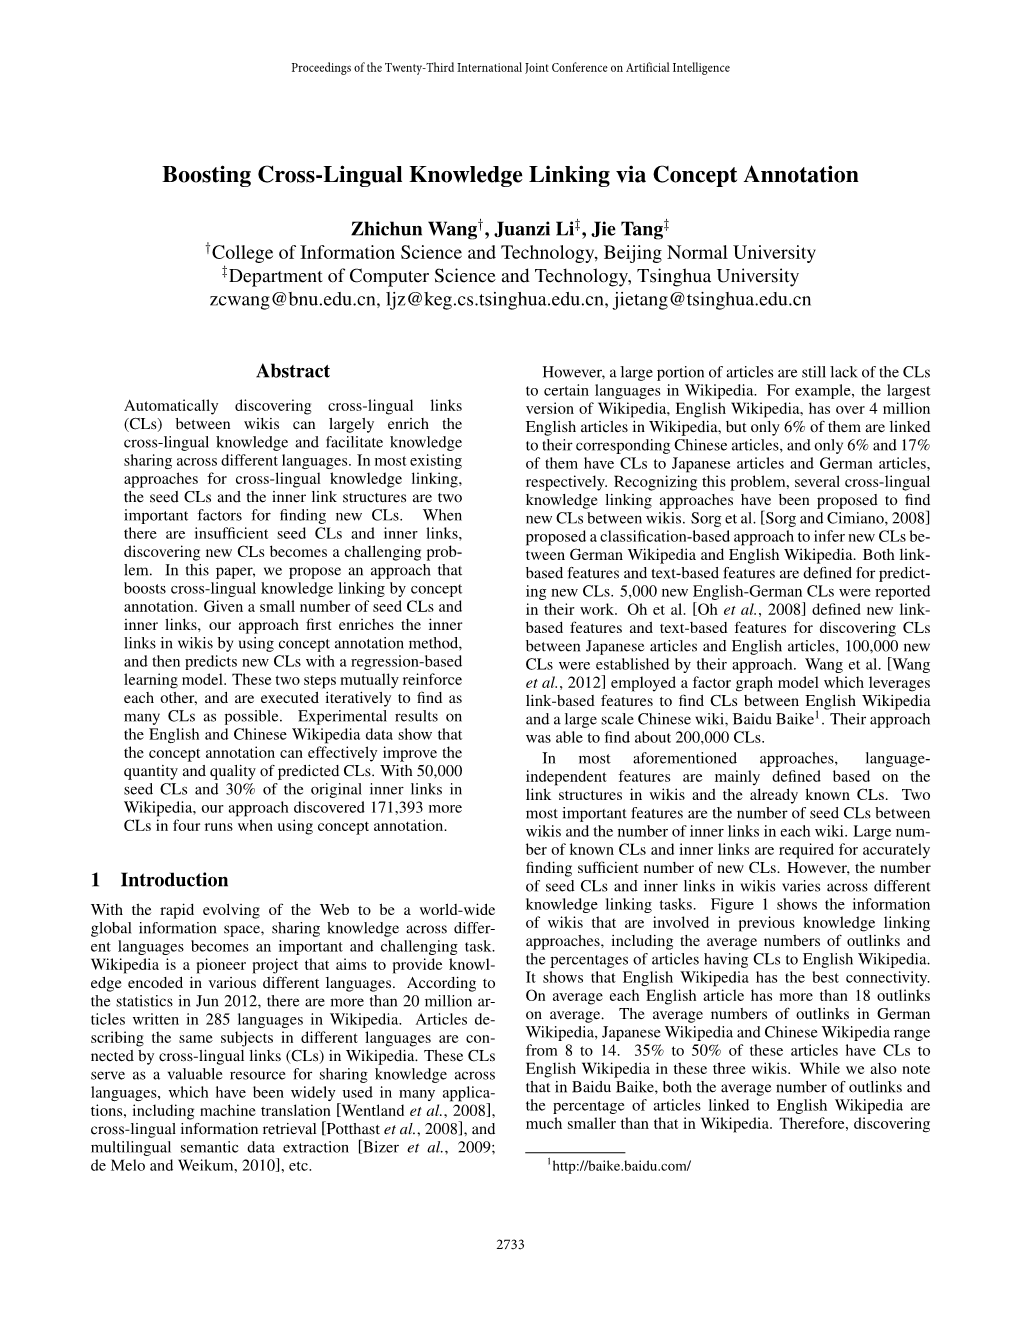 Boosting Cross-Lingual Knowledge Linking Via Concept Annotation